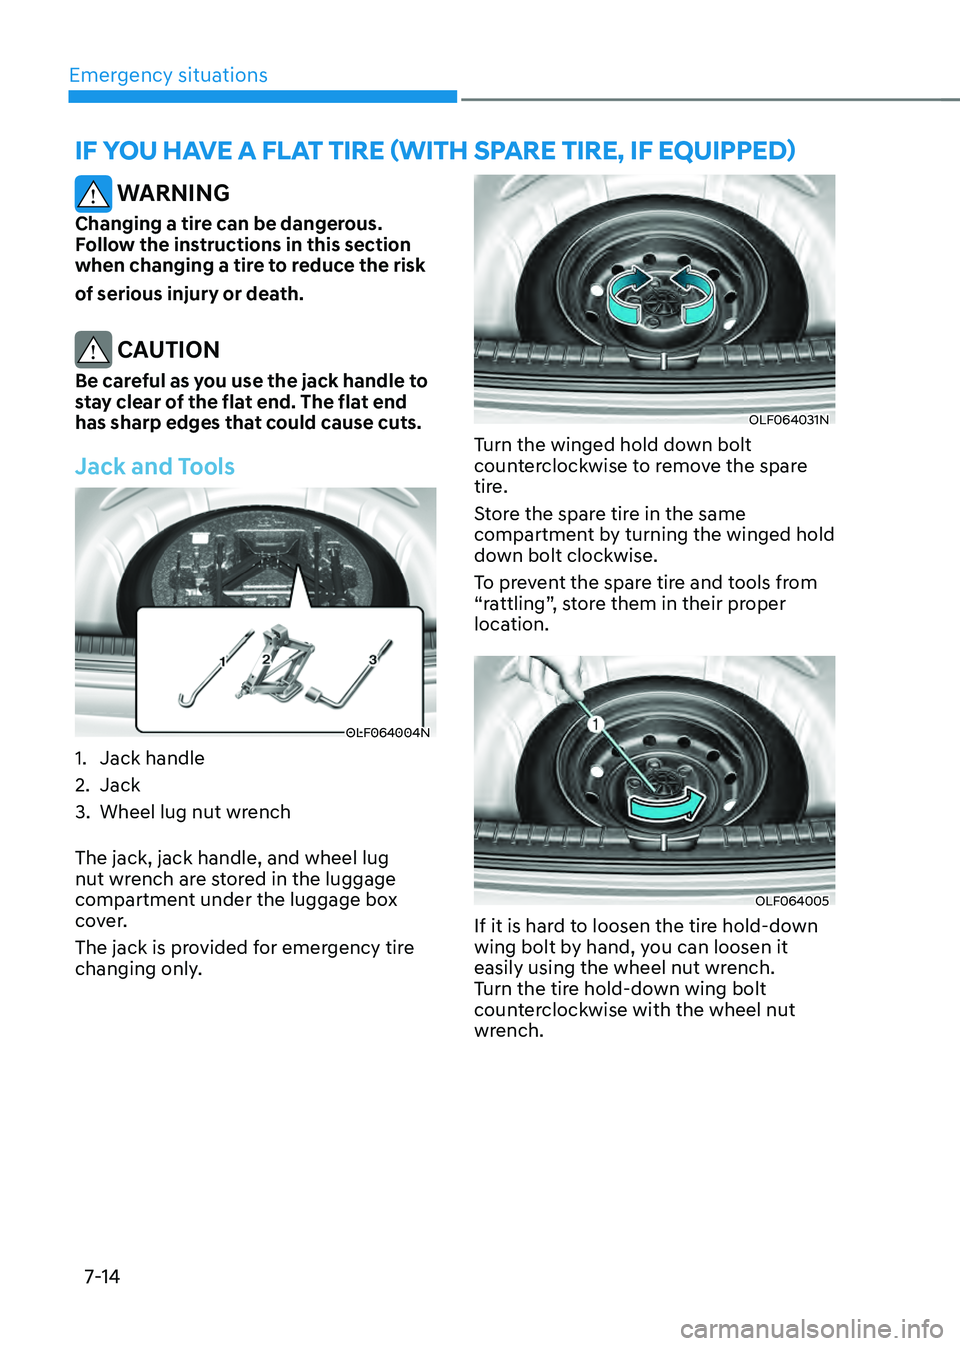 HYUNDAI SONATA HYBRID 2021  Owners Manual Emergency situations
7-14
IF YOU HAVE A FLAT TIRE (WITH SPARE TIRE, IF EQUIPPED)
 WARNING
Changing a tire can be dangerous. 
Follow the instructions in this section 
when changing a tire to reduce the